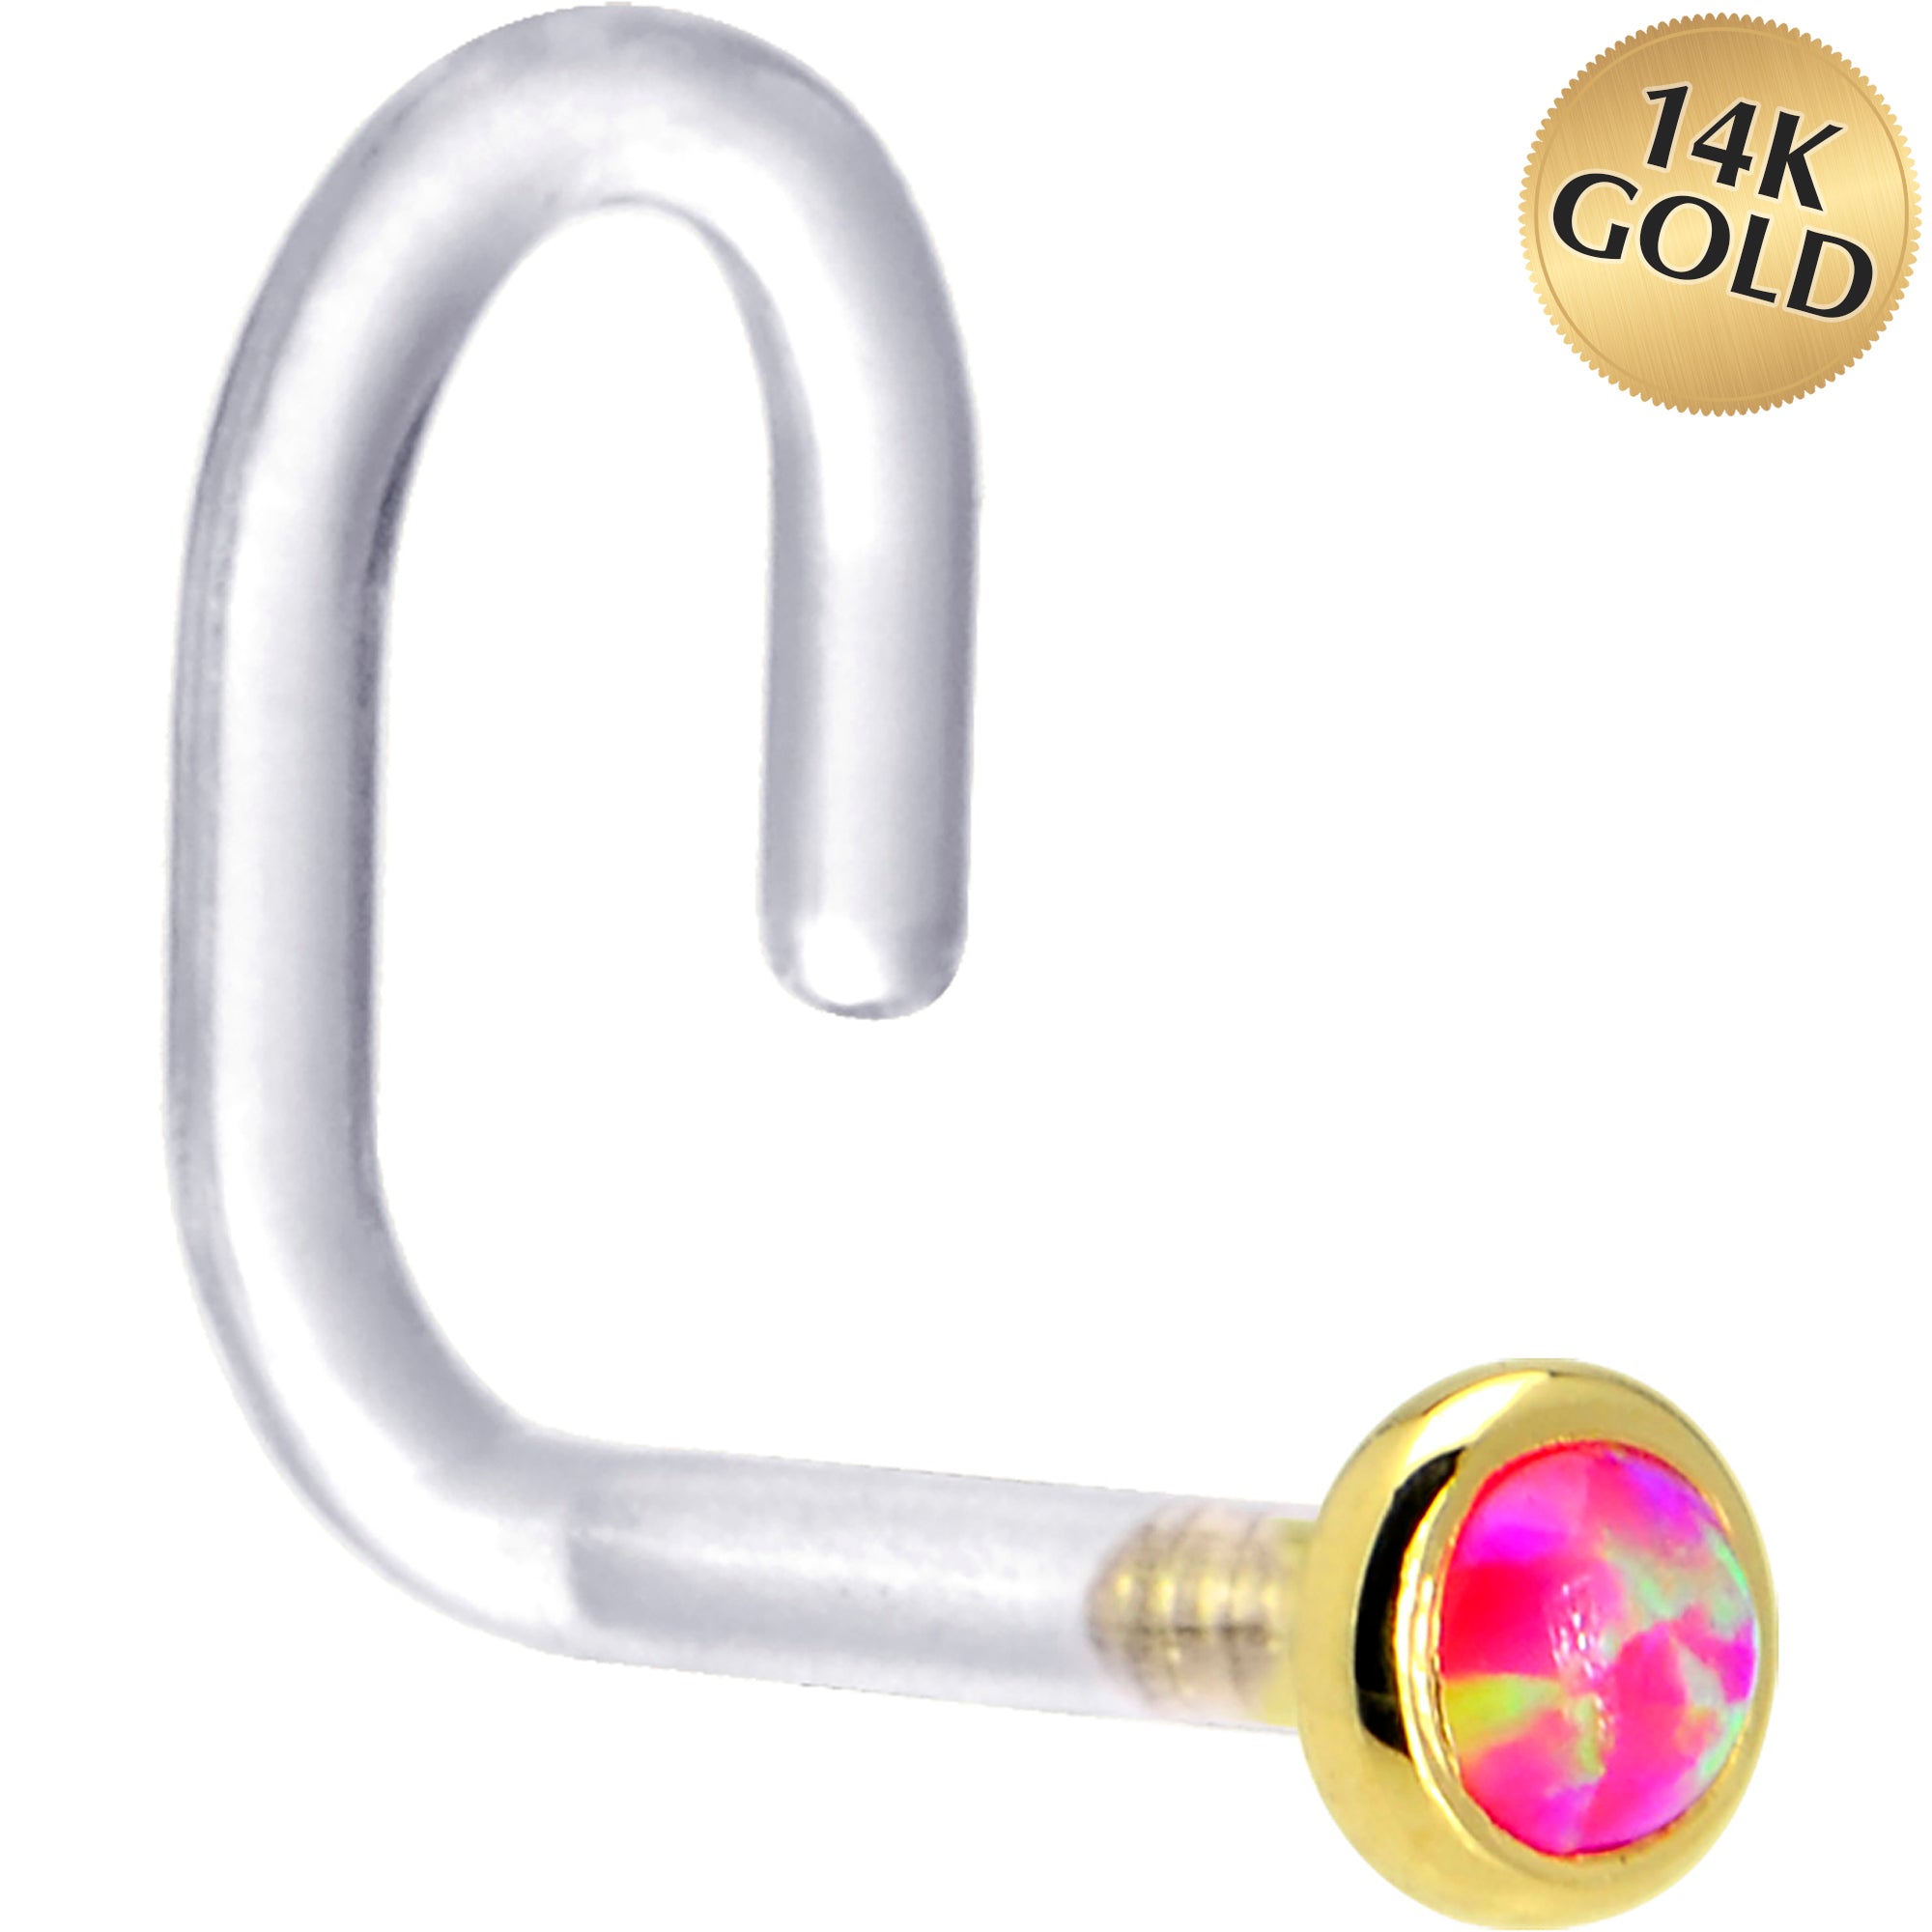 18 Gauge 1/4 Yellow Gold 2mm Brilliant Pink Synthetic Opal Bioplast Nose Ring